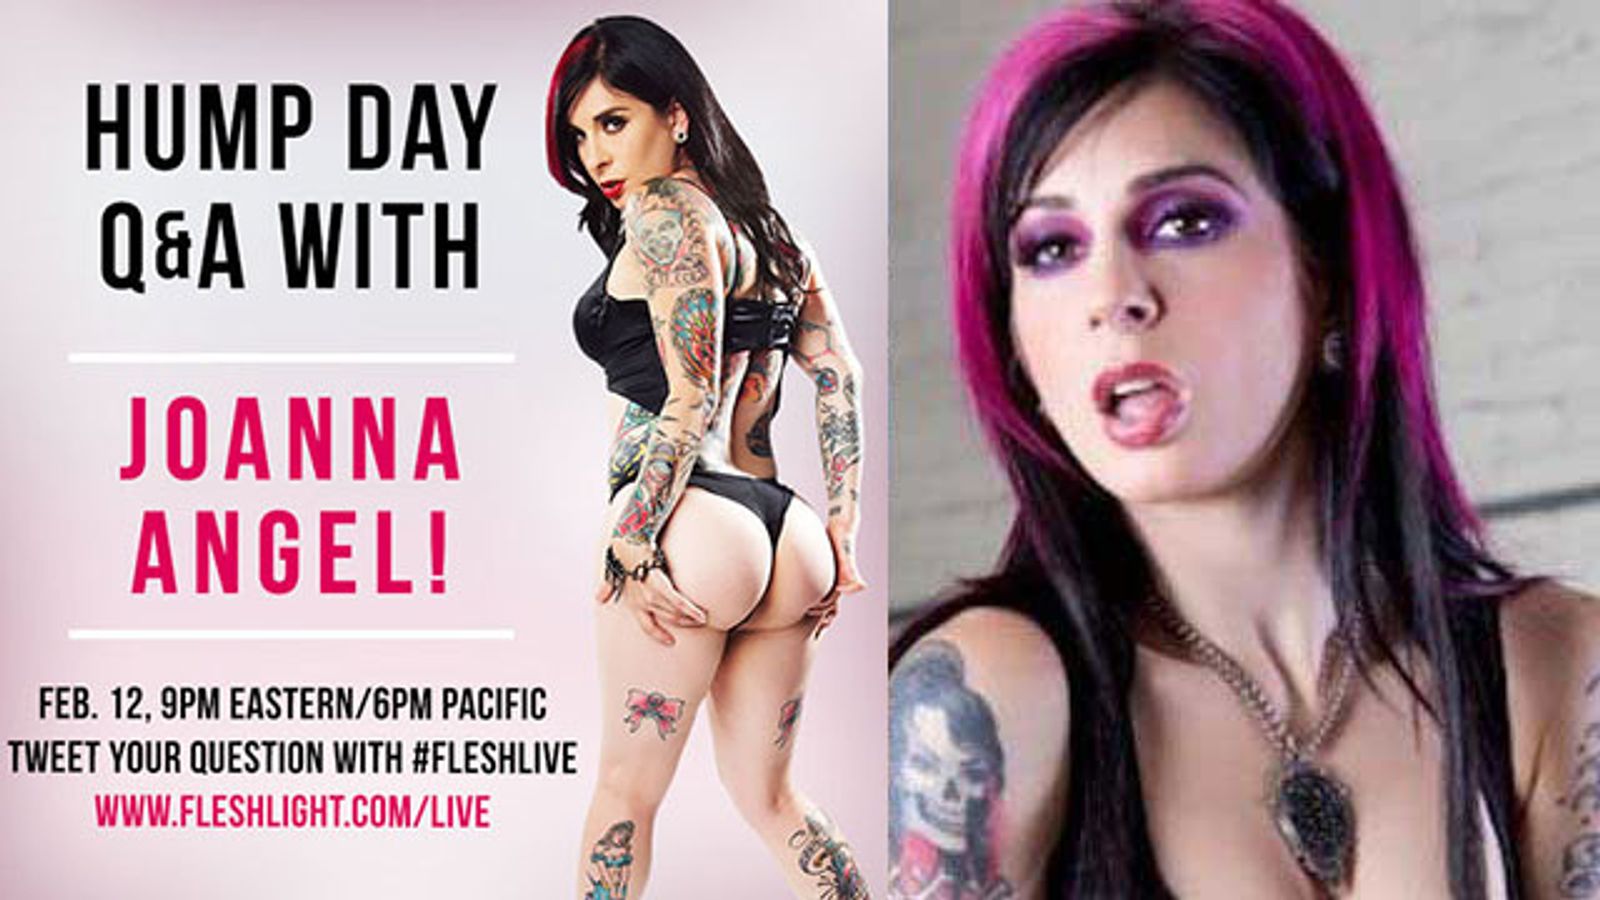 Joanna Angel to Hold Exclusive Hump Day Q&A on Fleshlight.com